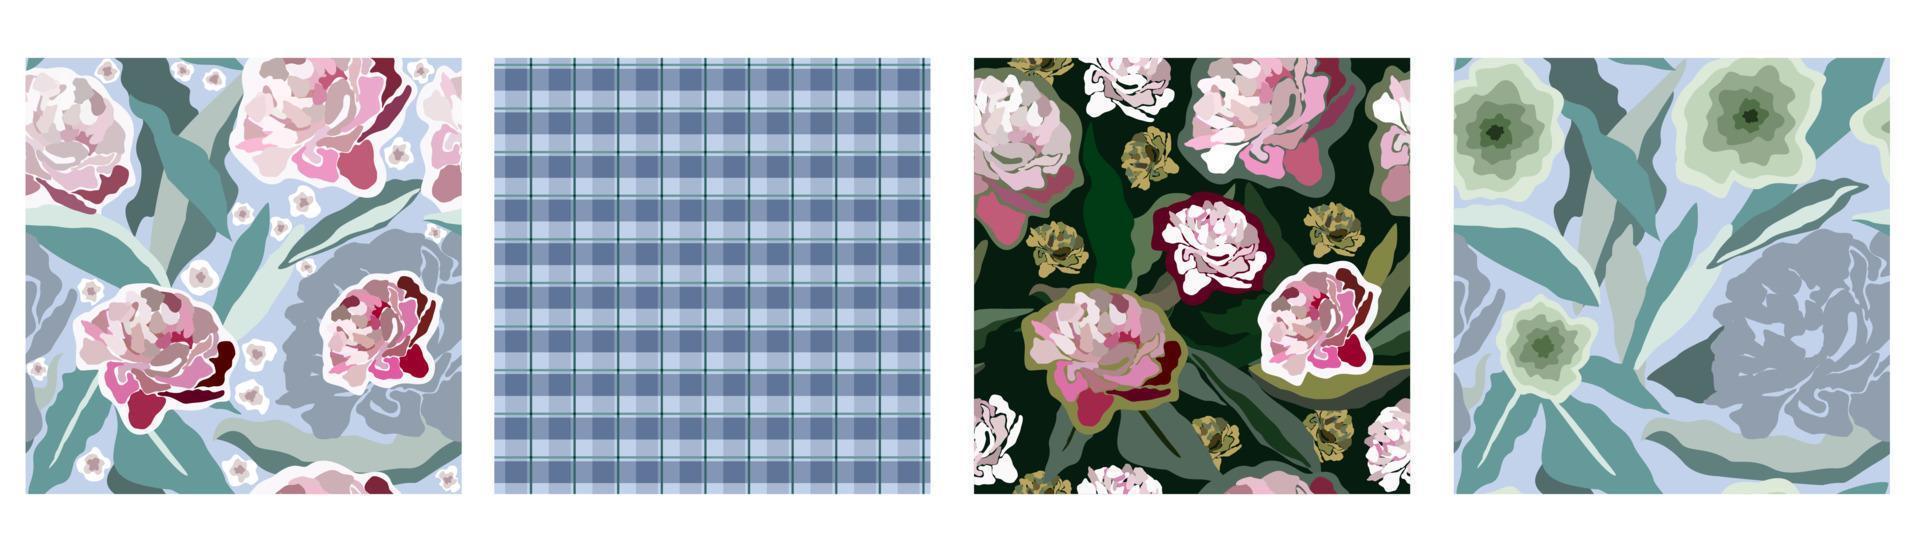 Blue and pink floral pattern set vector